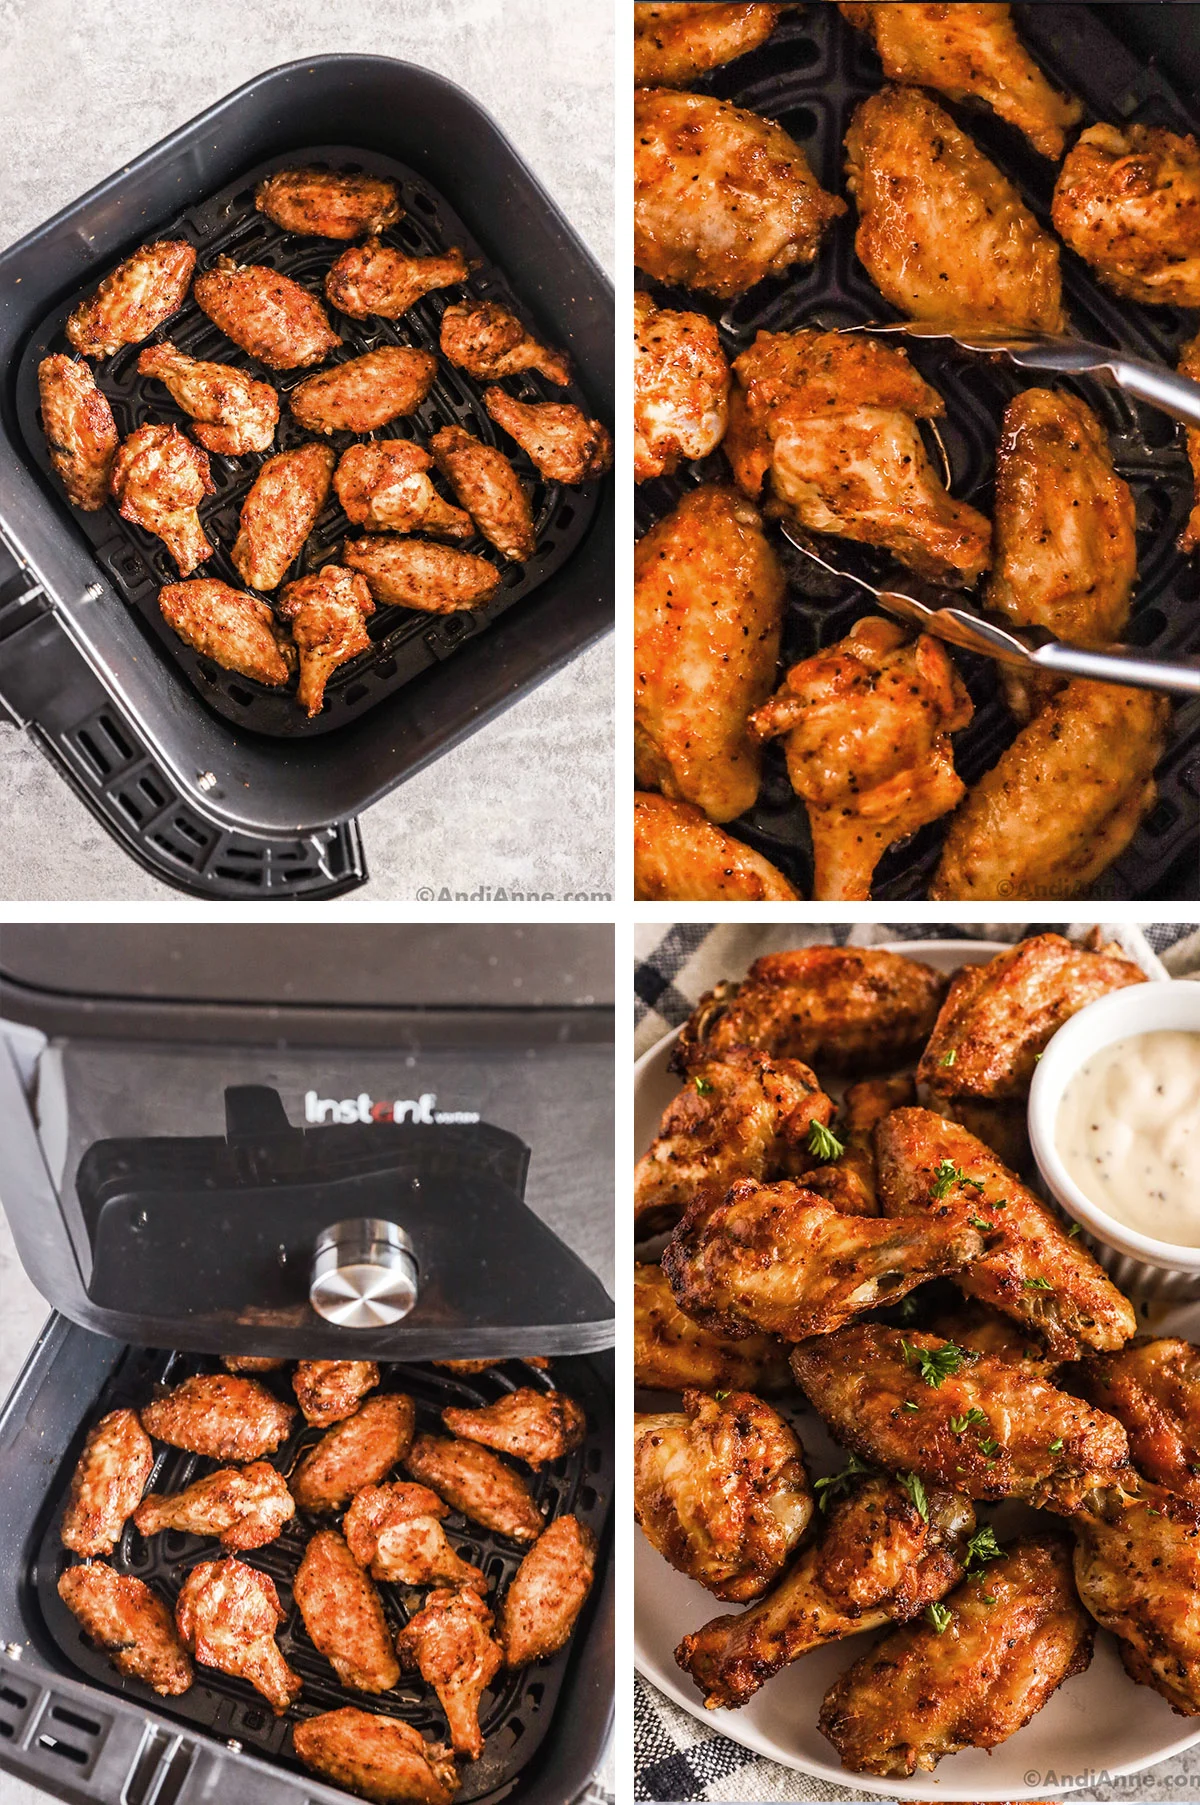 Crispy chicken wings in an air fryer, a pair of tong grabbing a wing, and wings on a plate with ranch dip.